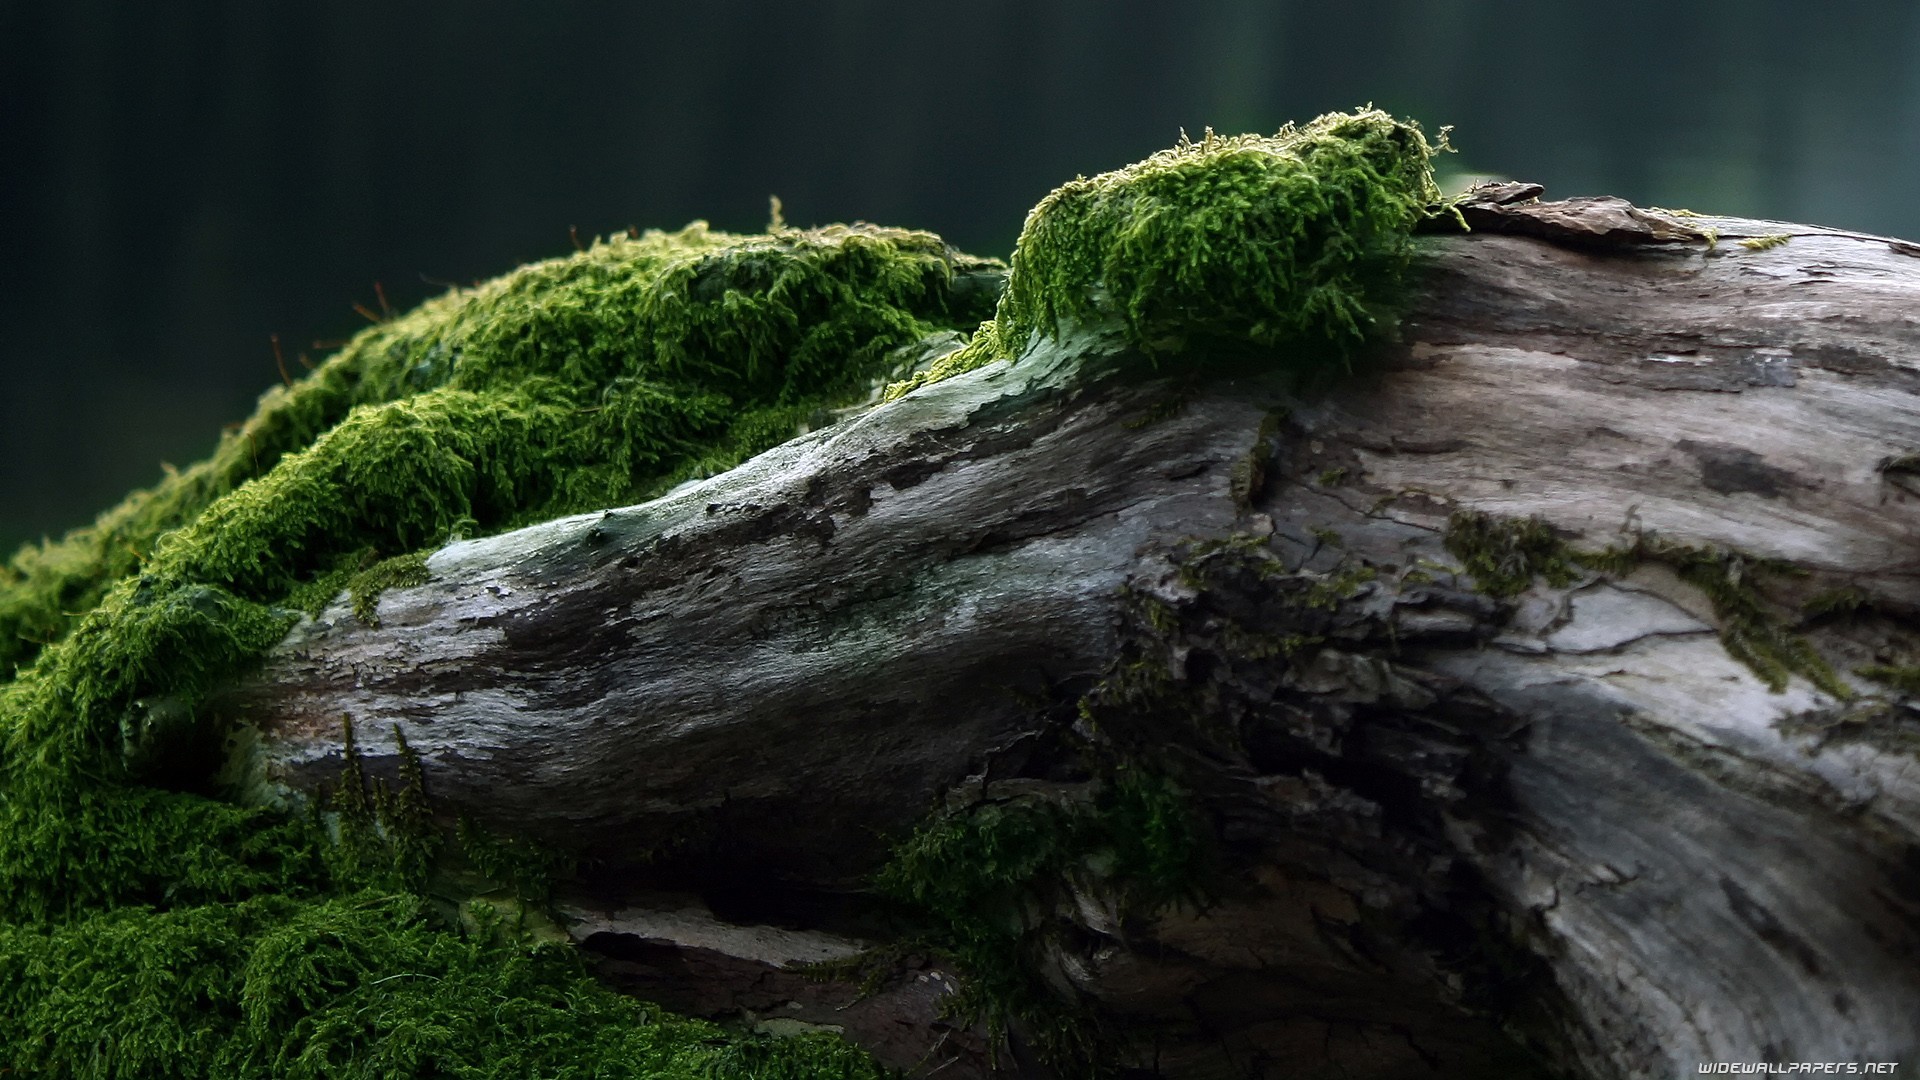 General 1920x1080 wood forest moss green trees nature plants